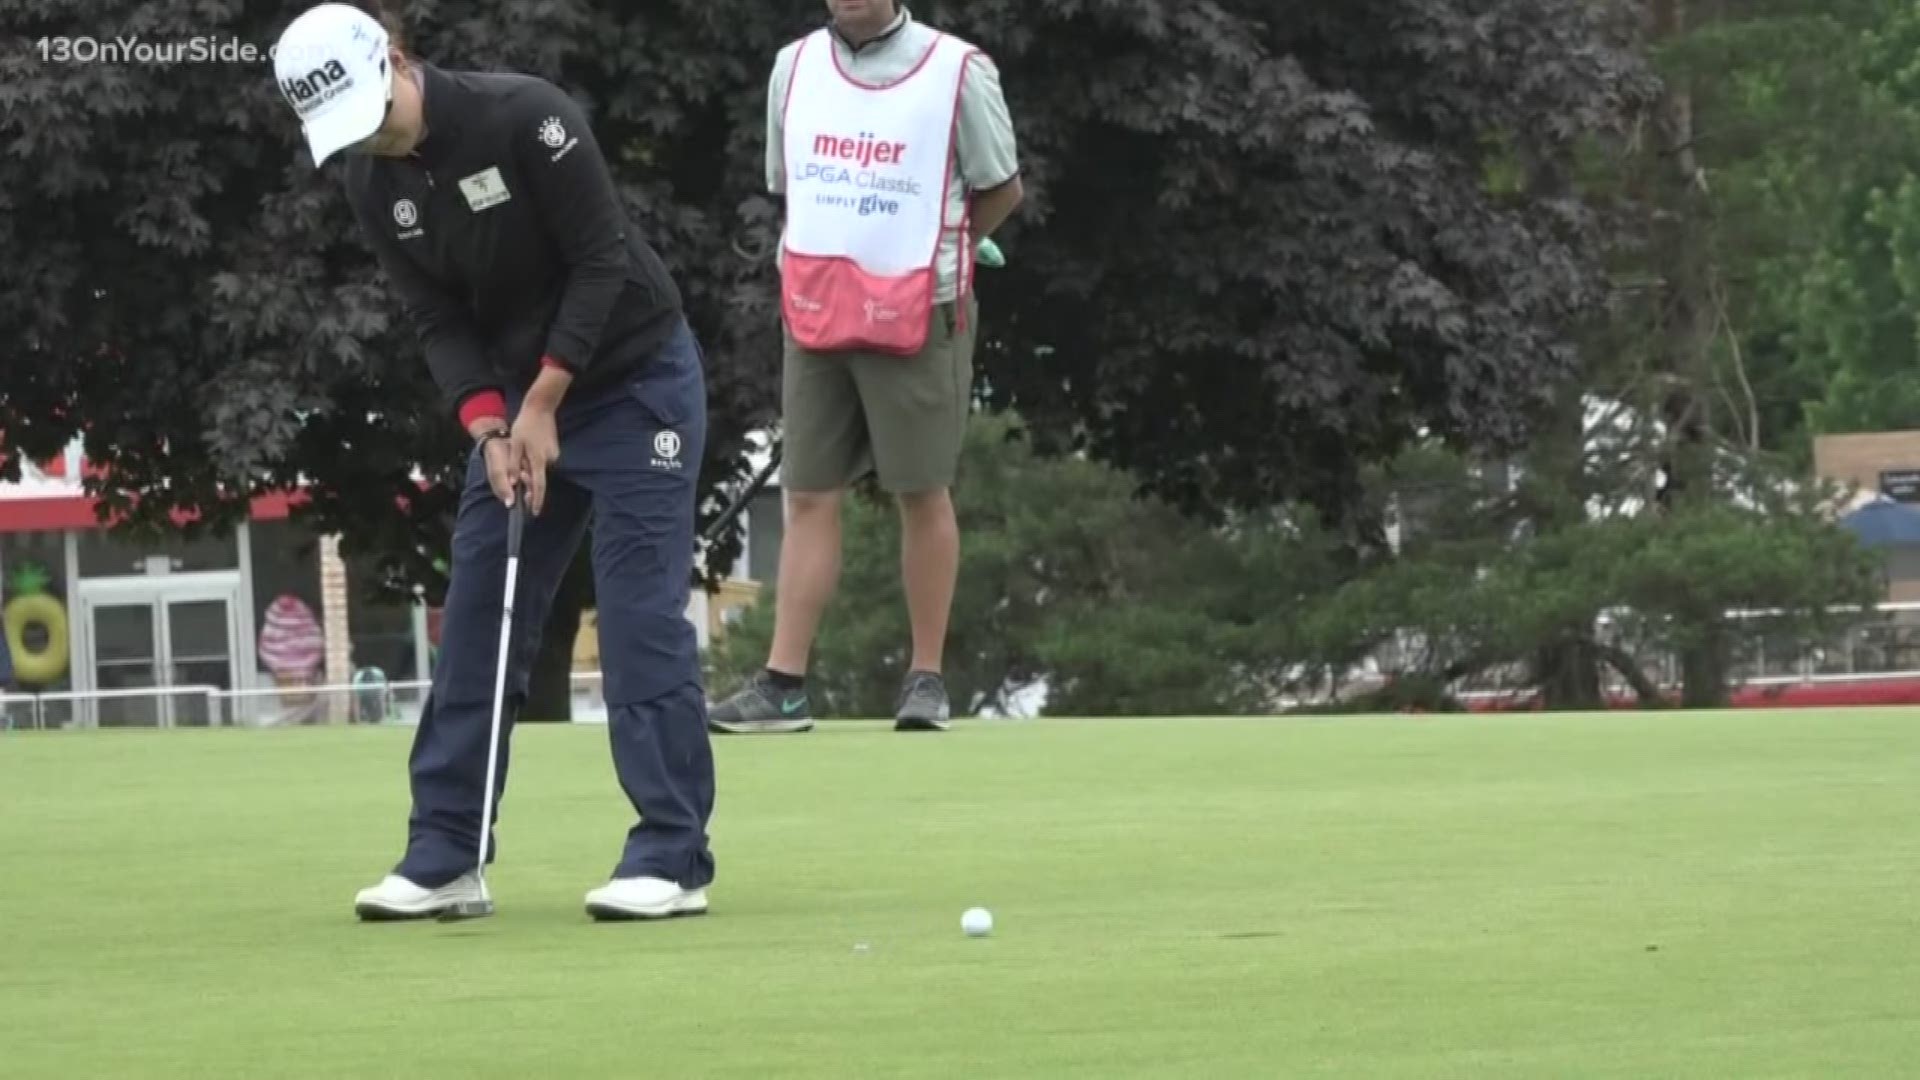 13 ON YOUR SIDE's Jamal Spencer gives us a full recap of the first round of Meijer LPGA Classic for Simply Give. The start was soggy and delayed for hours, but players got on the green.